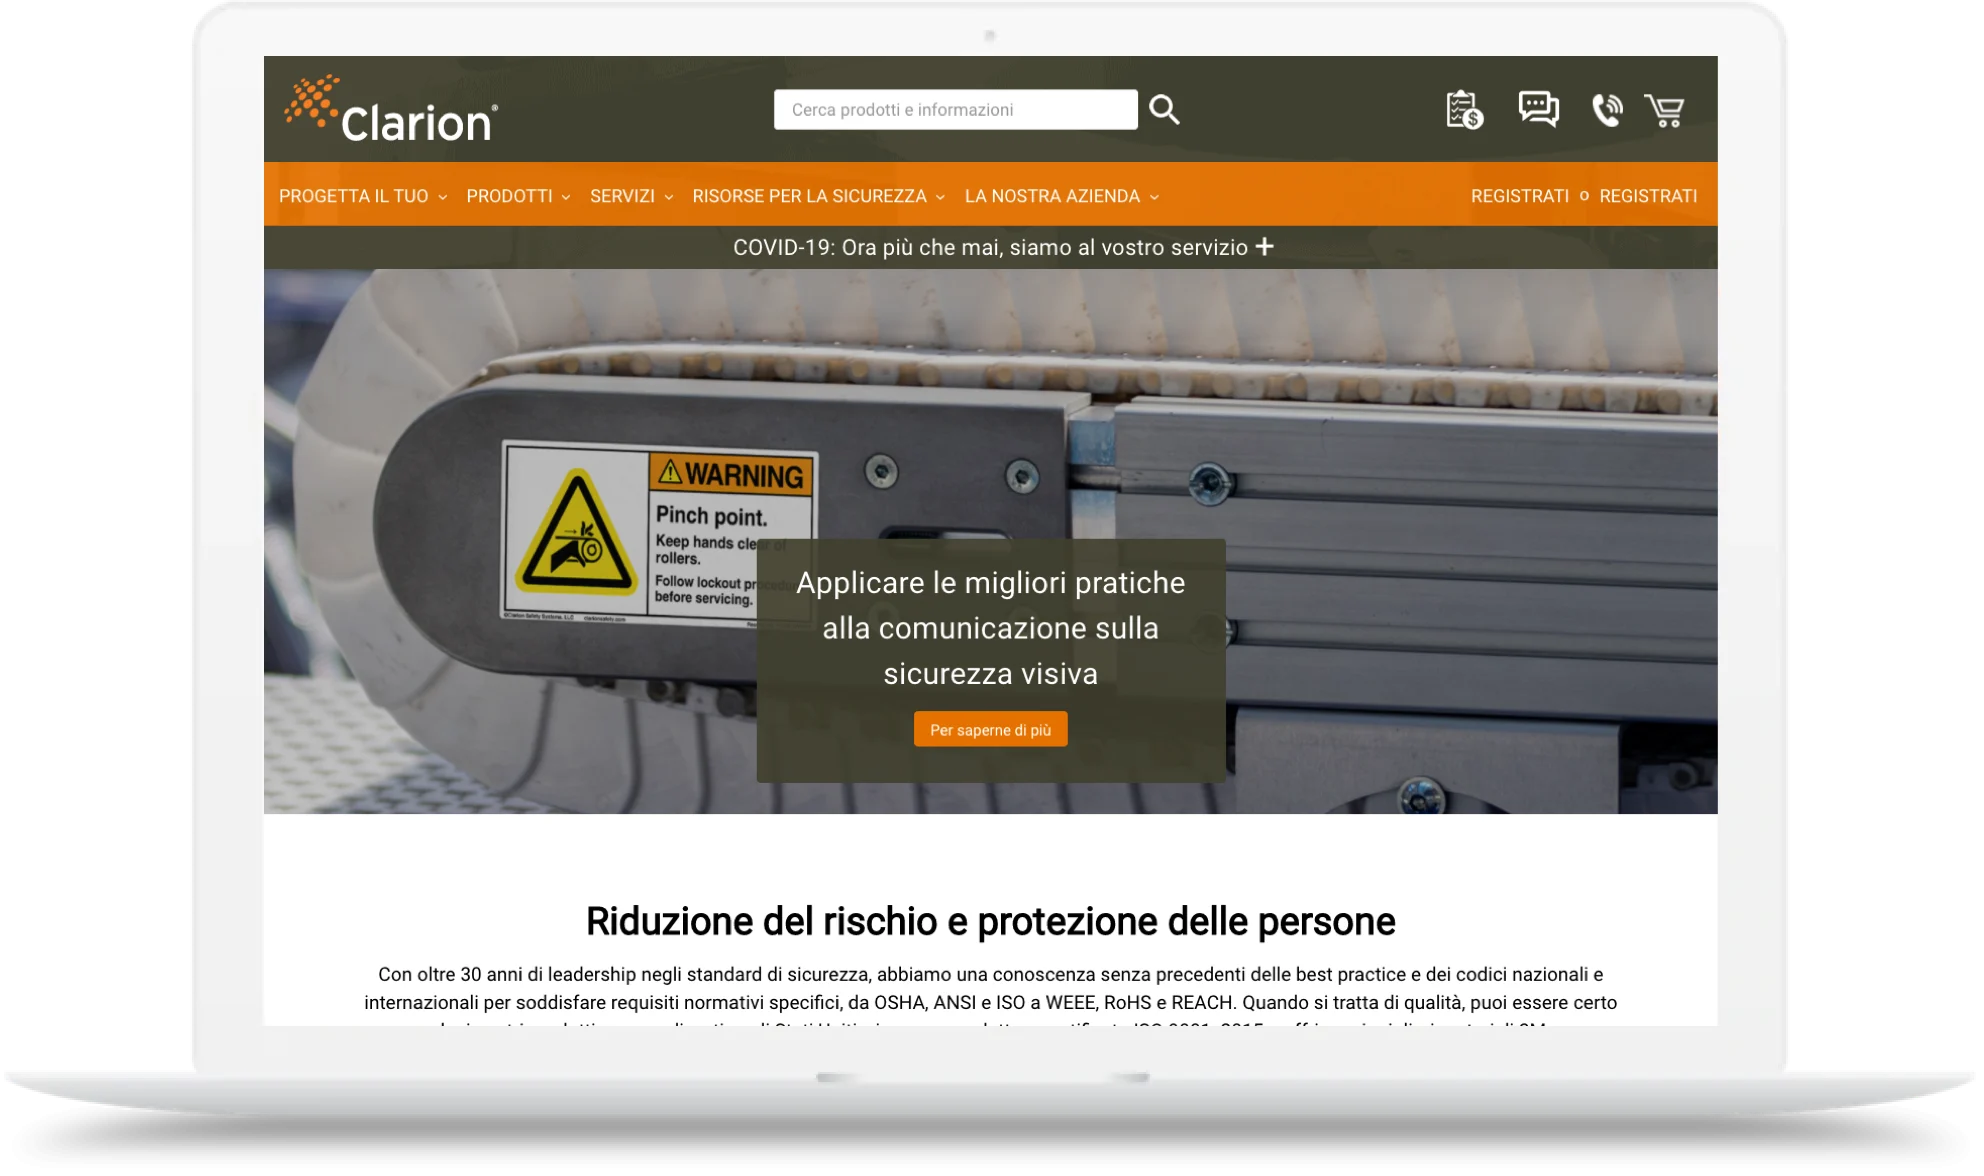 https://www-cdn.bigcommerce.com/assets/italian-storefront-homepage-device-clario-safety-systems.png